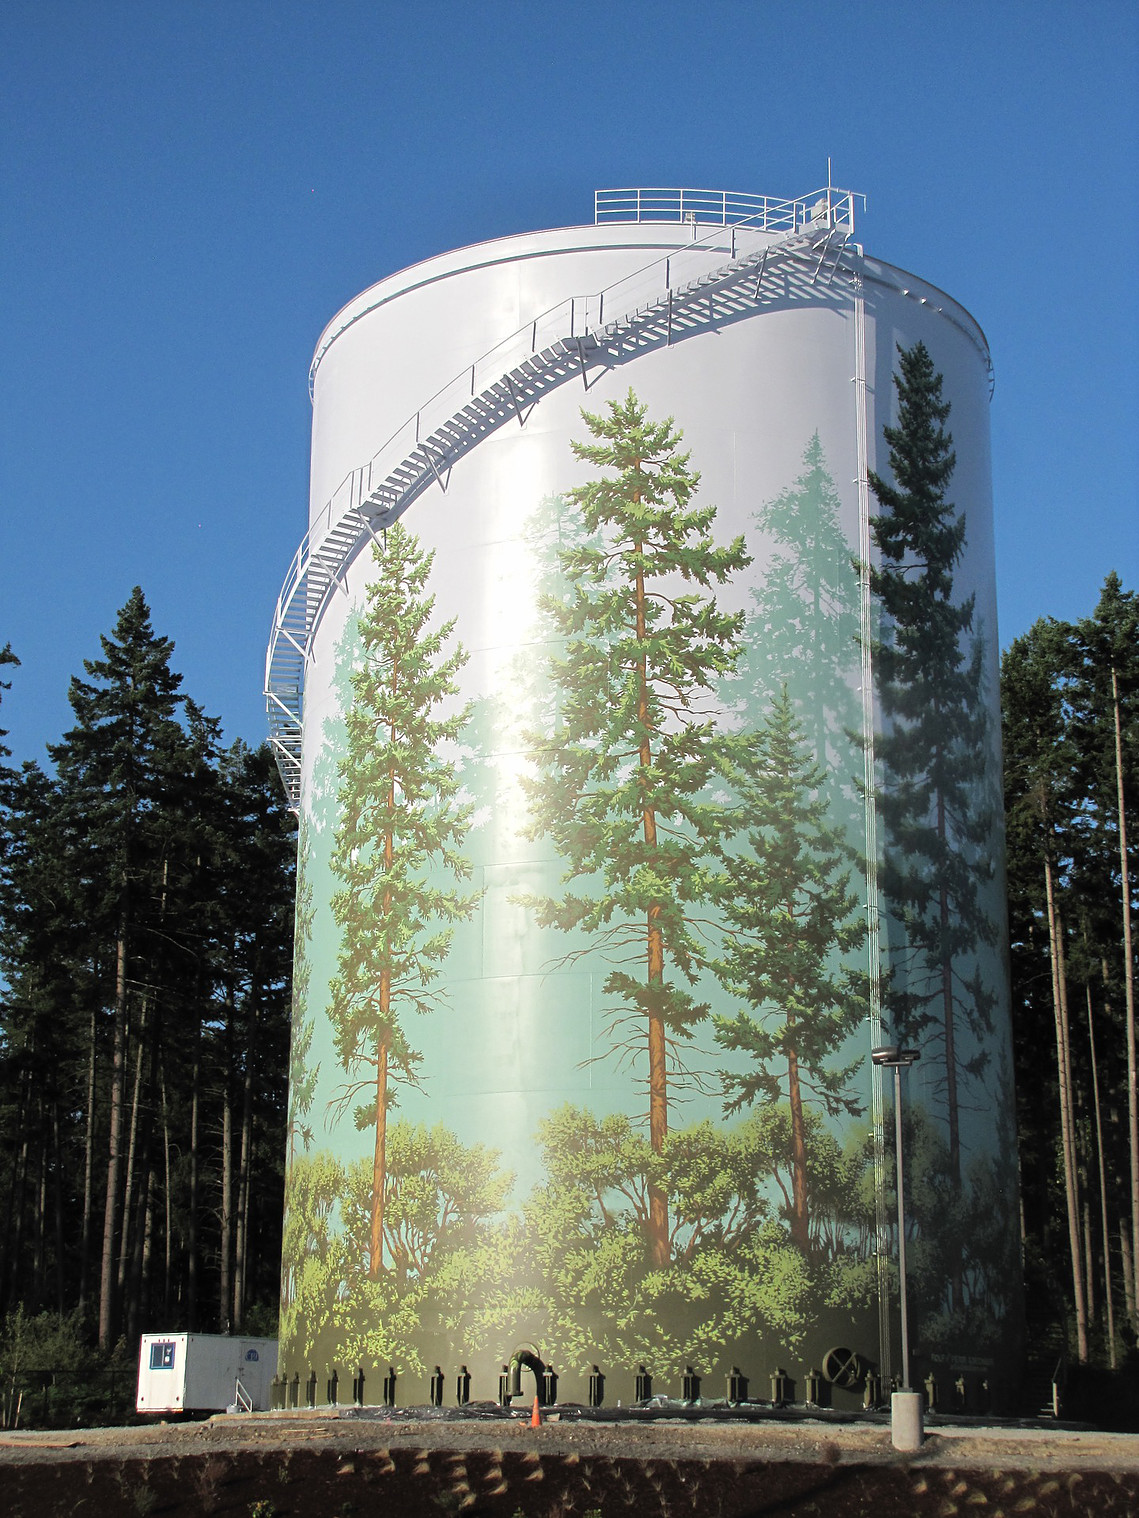 This sketch gives us a bit of insight into the lengthy planning process for these kinds of extraordinary public water  tower paintings.